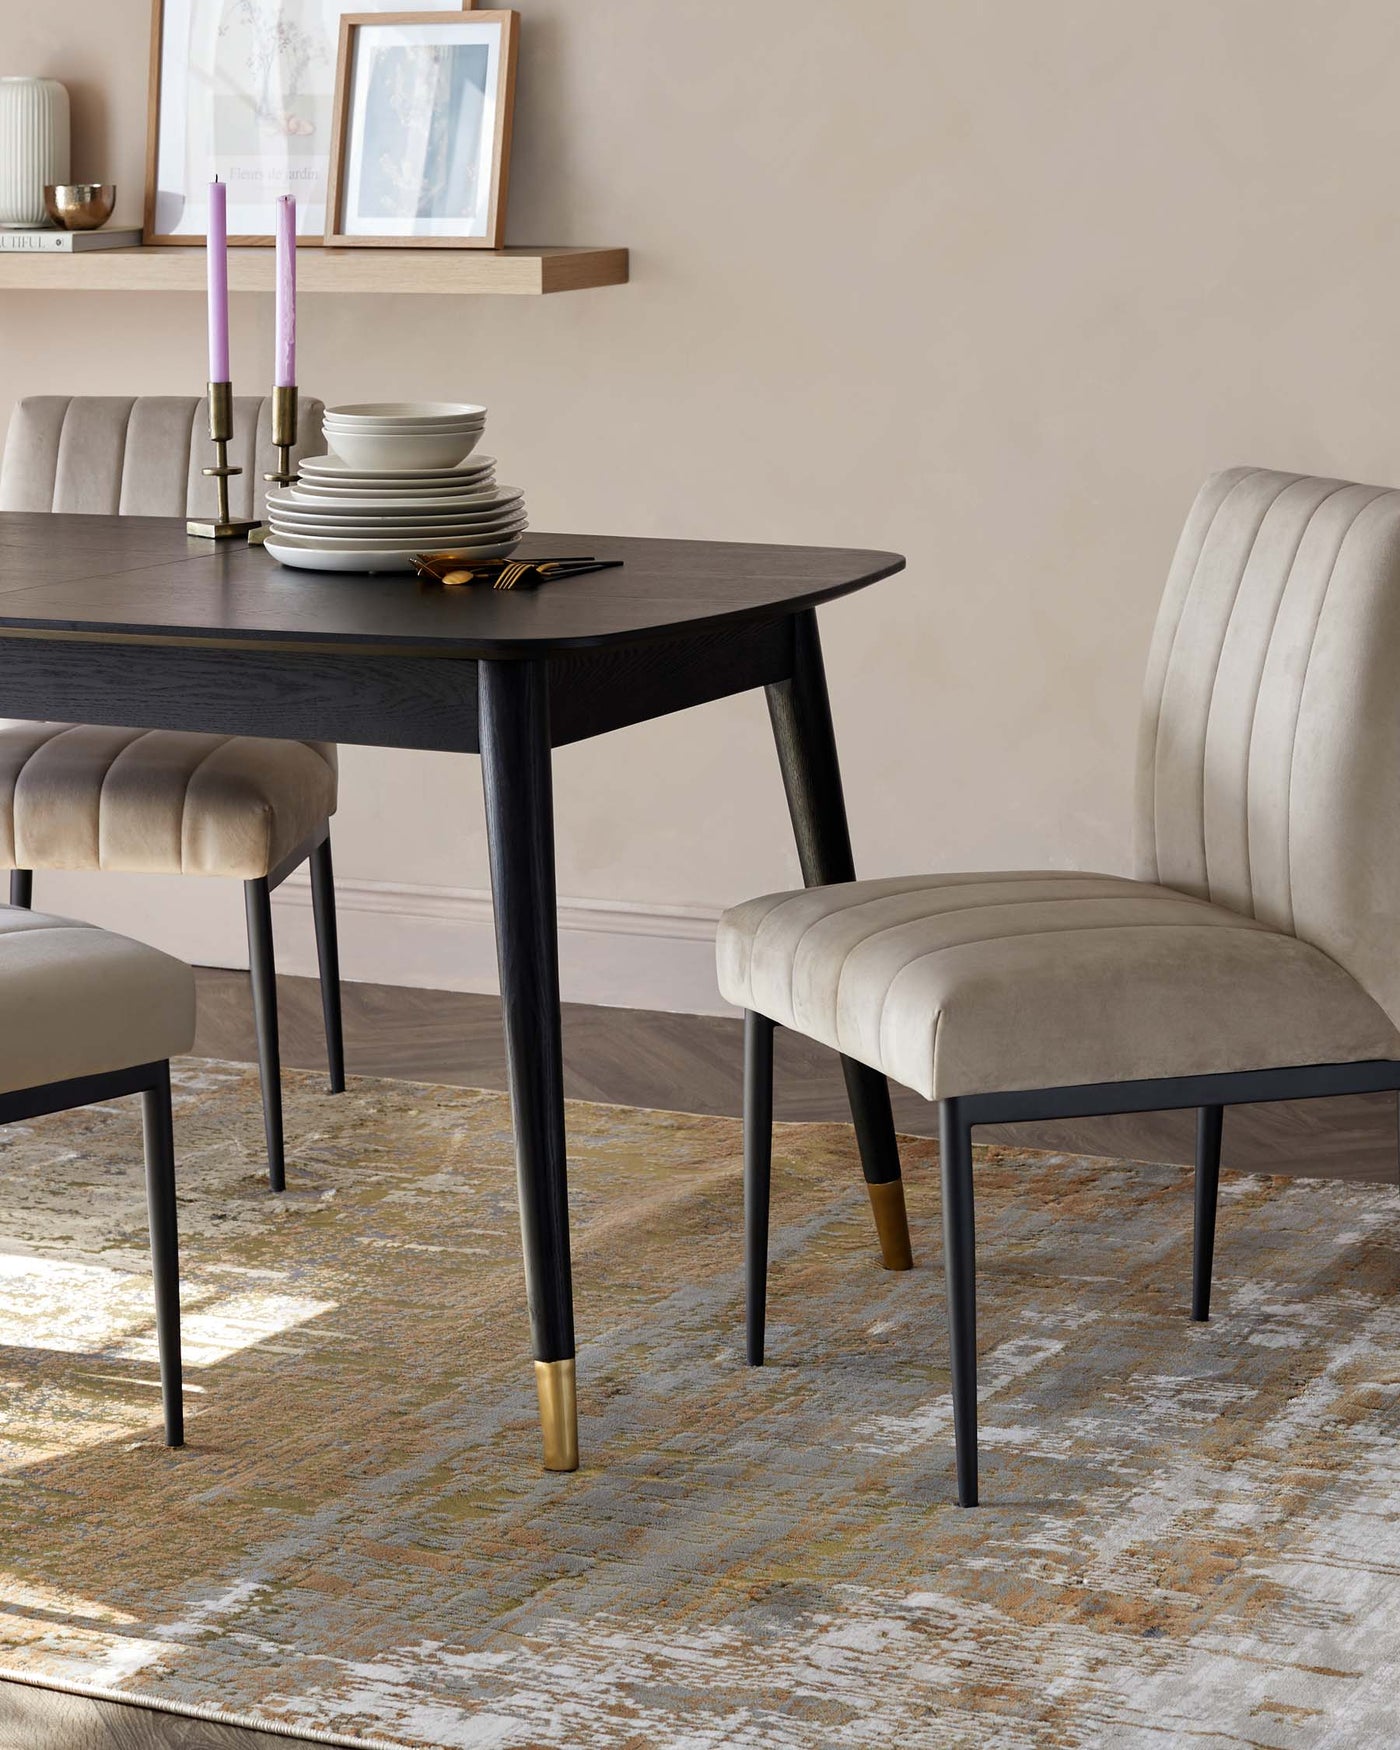 Elegant dining area with a modern black rectangular table featuring wood texture and slender legs with brass feet accents. Two contemporary upholstered dining chairs with beige fabric and vertical channel tufting complete the set. The furniture stands on a distressed multicolour area rug that adds a vintage touch to the space.